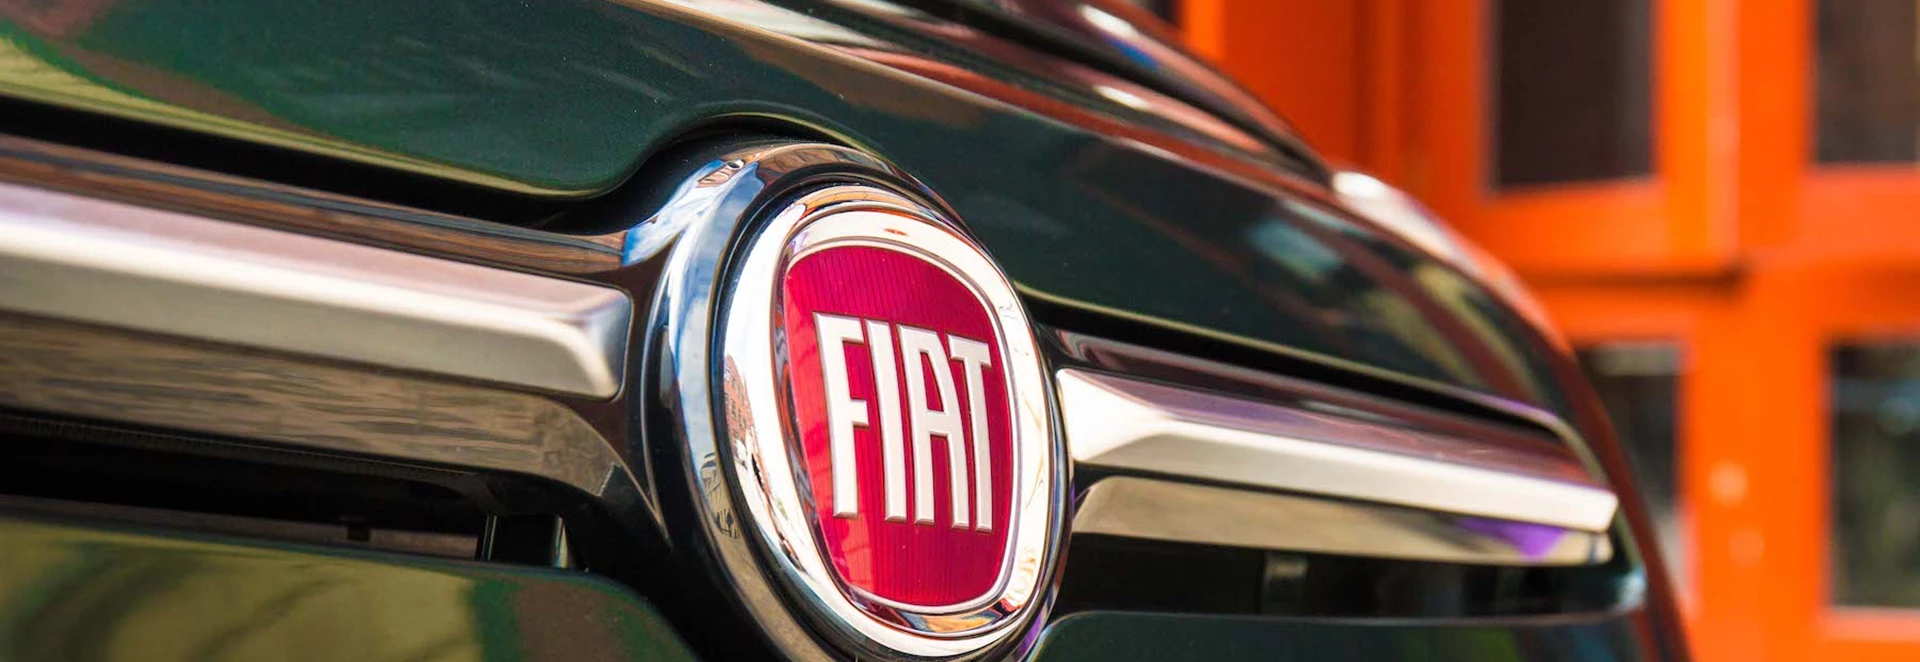 Fiat Chrysler confirmed to be in talks with PSA Group